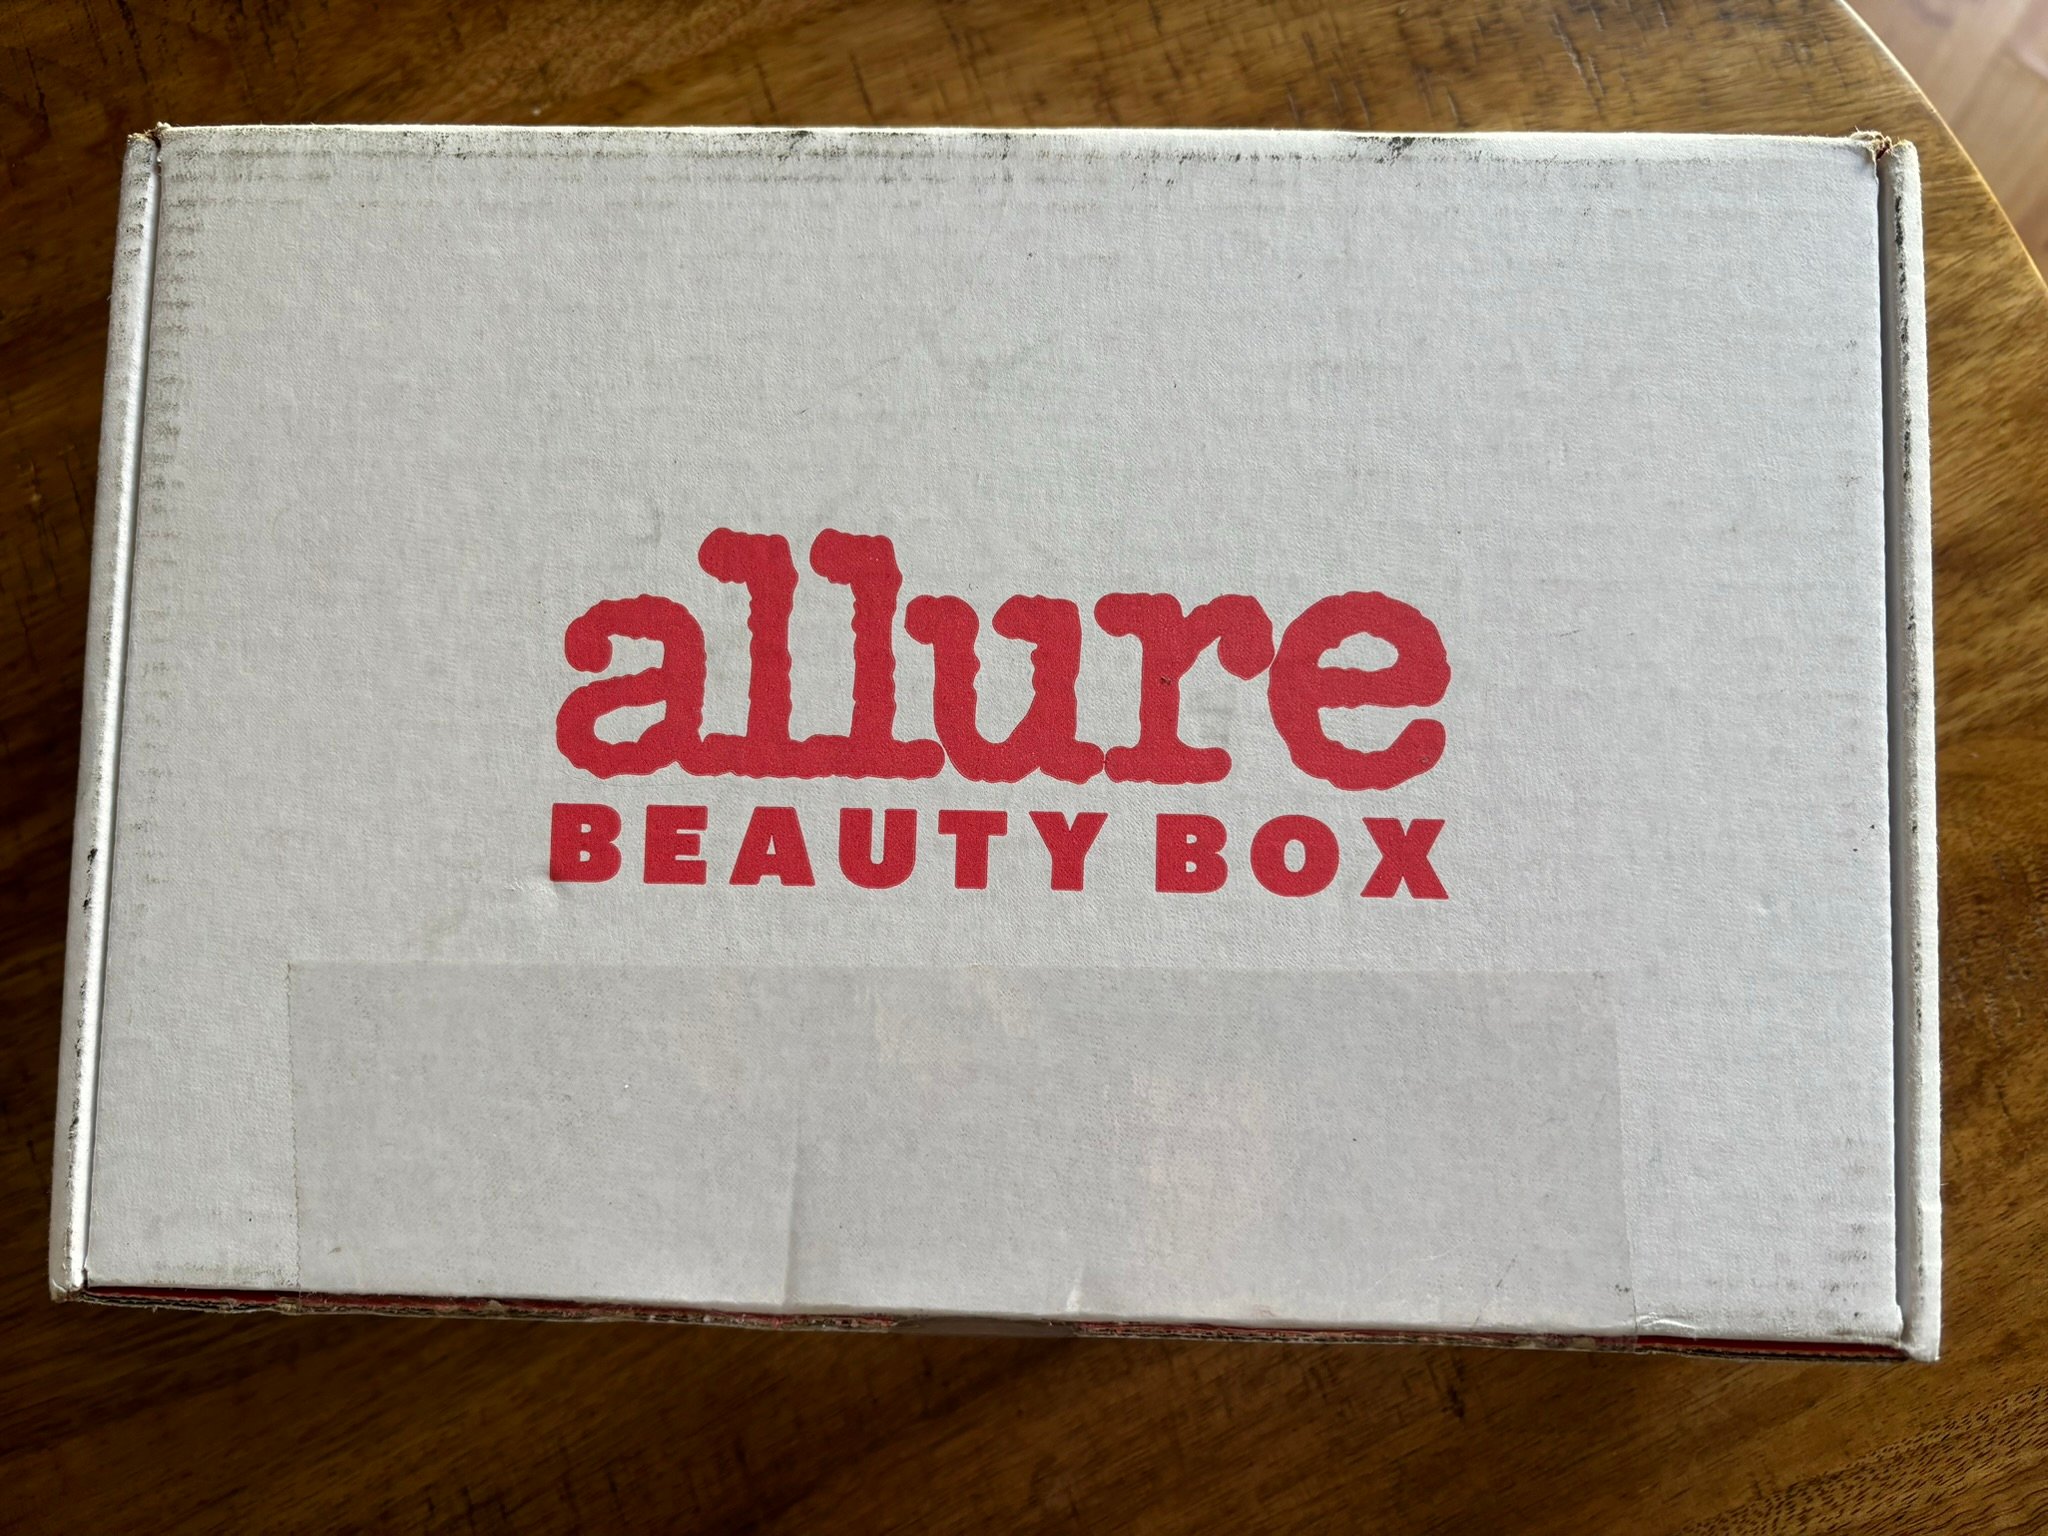 white box with red text that says Allure Beauty Box